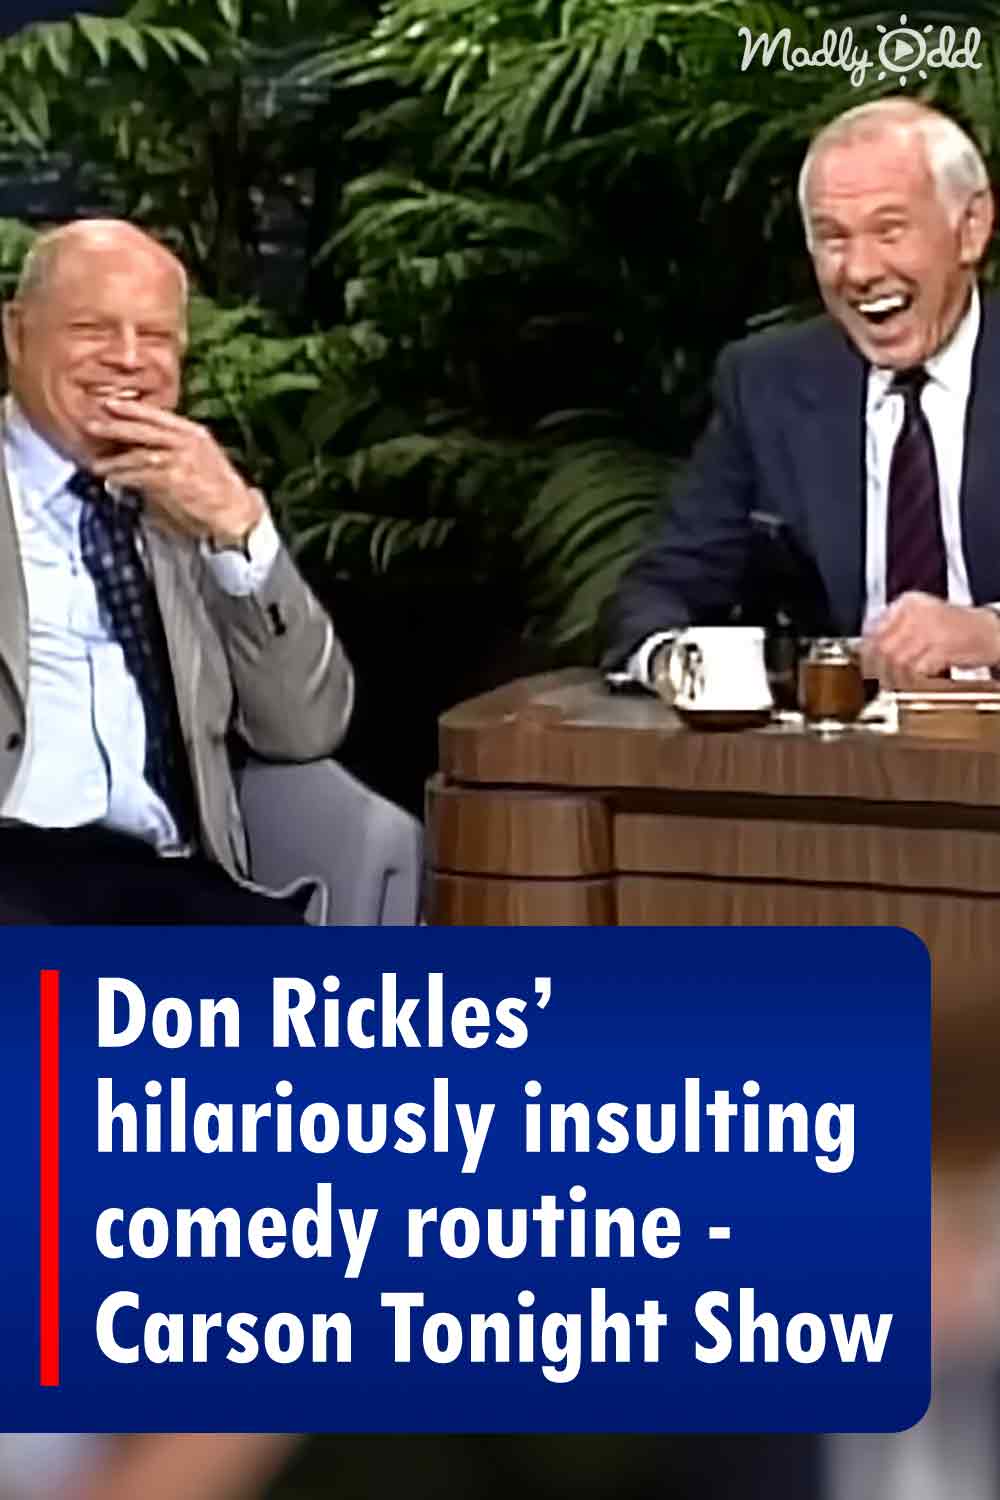 Don Rickles’ hilariously insulting comedy routine - Carson Tonight Show